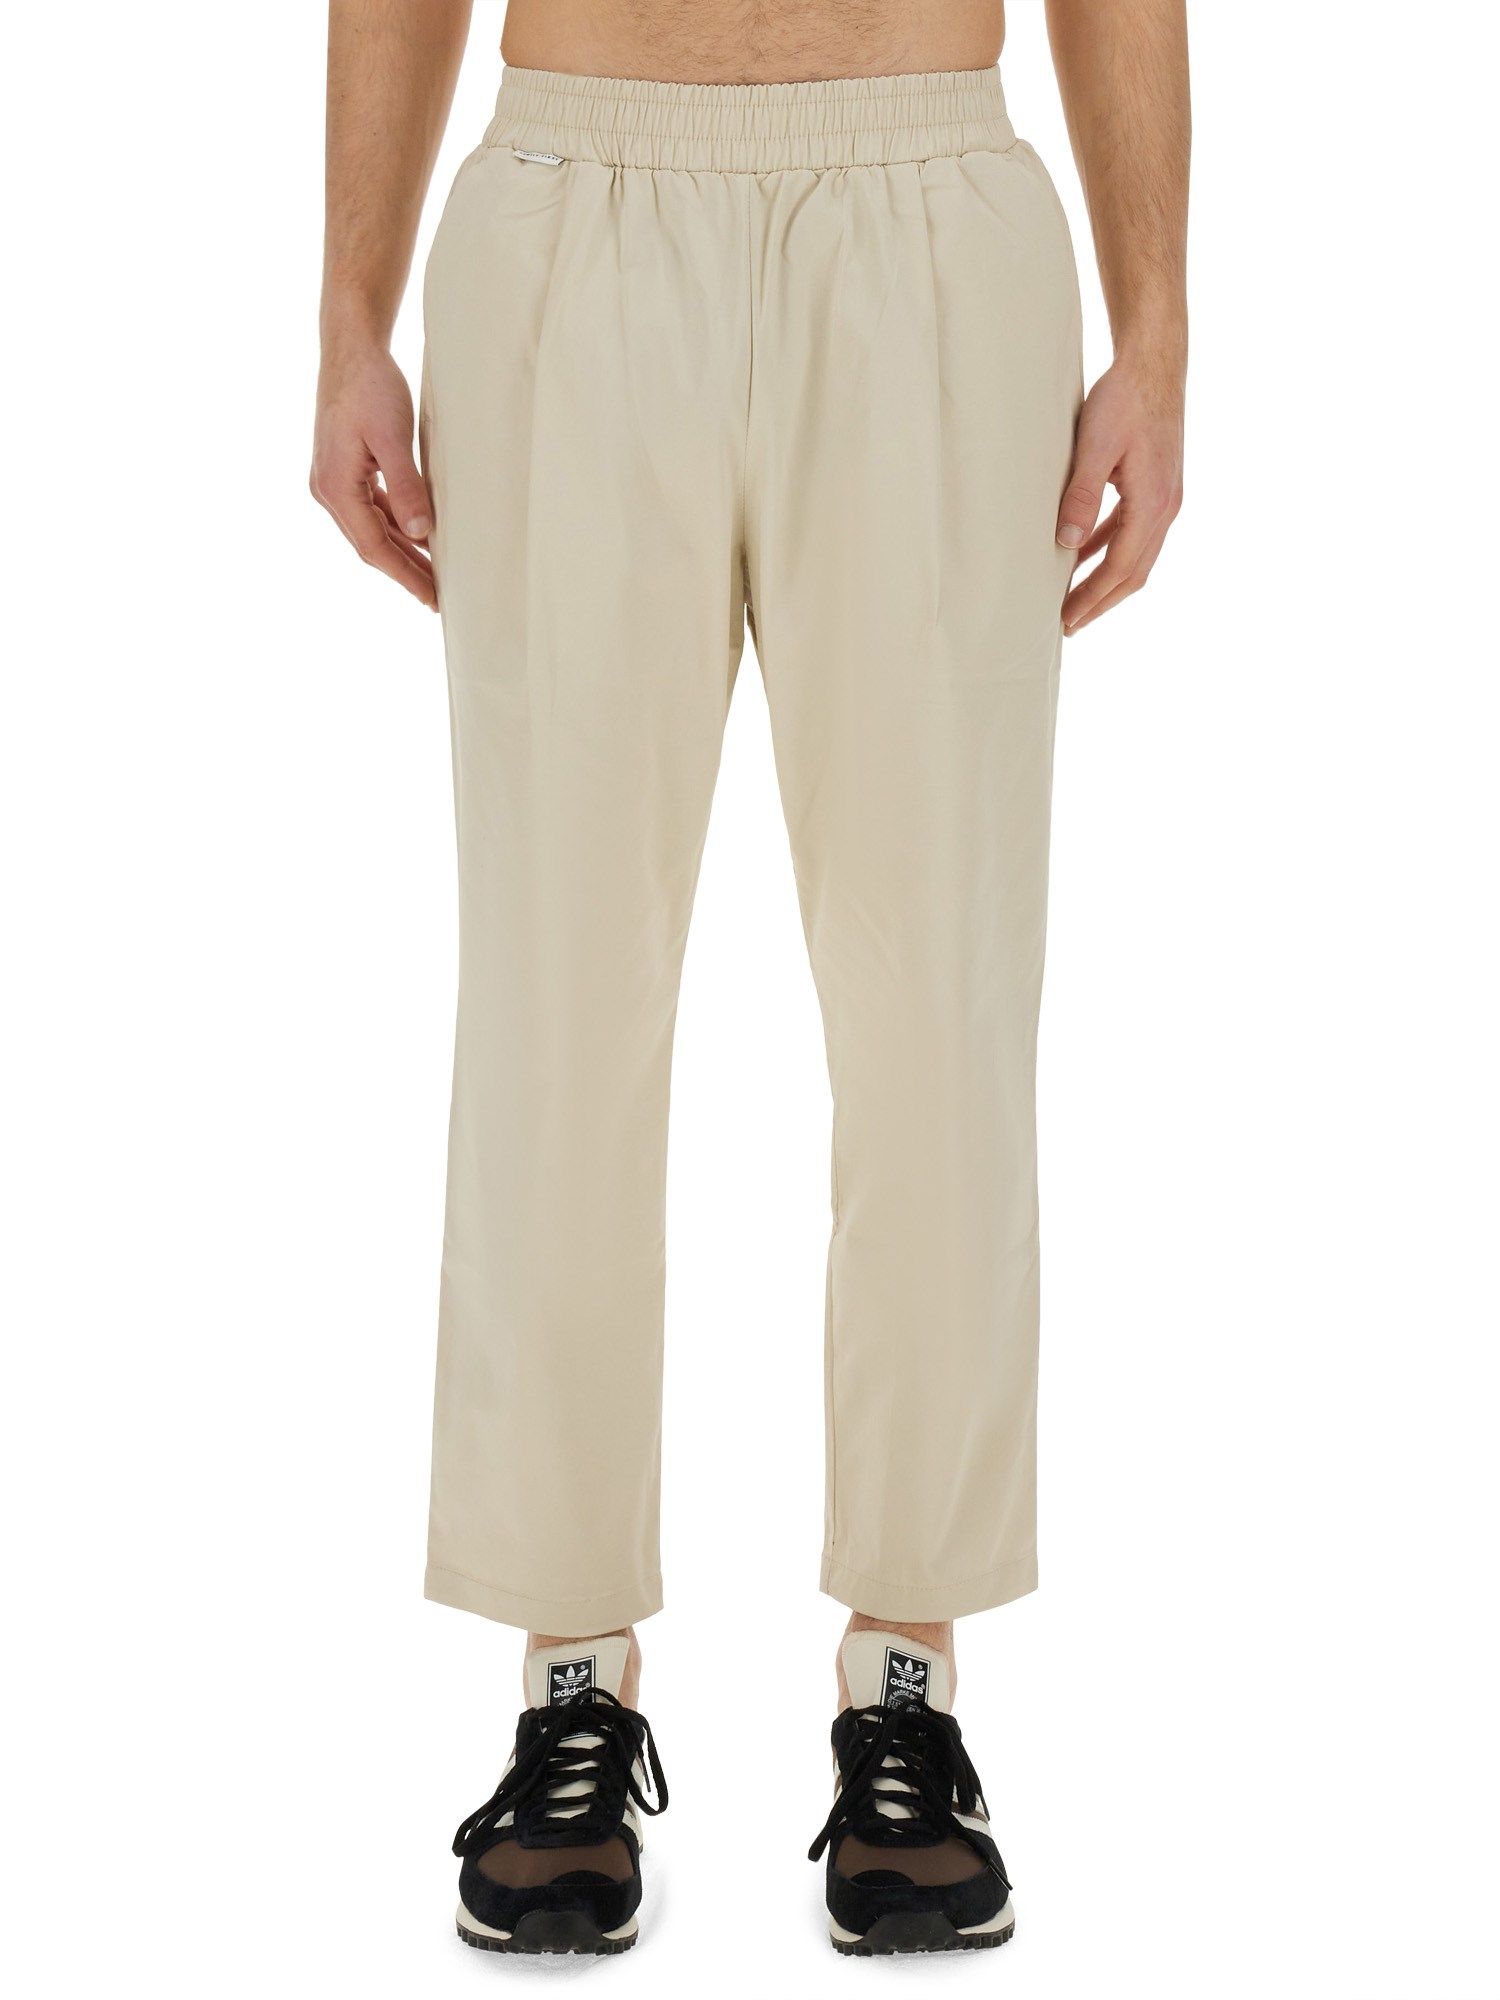 family first chino pants